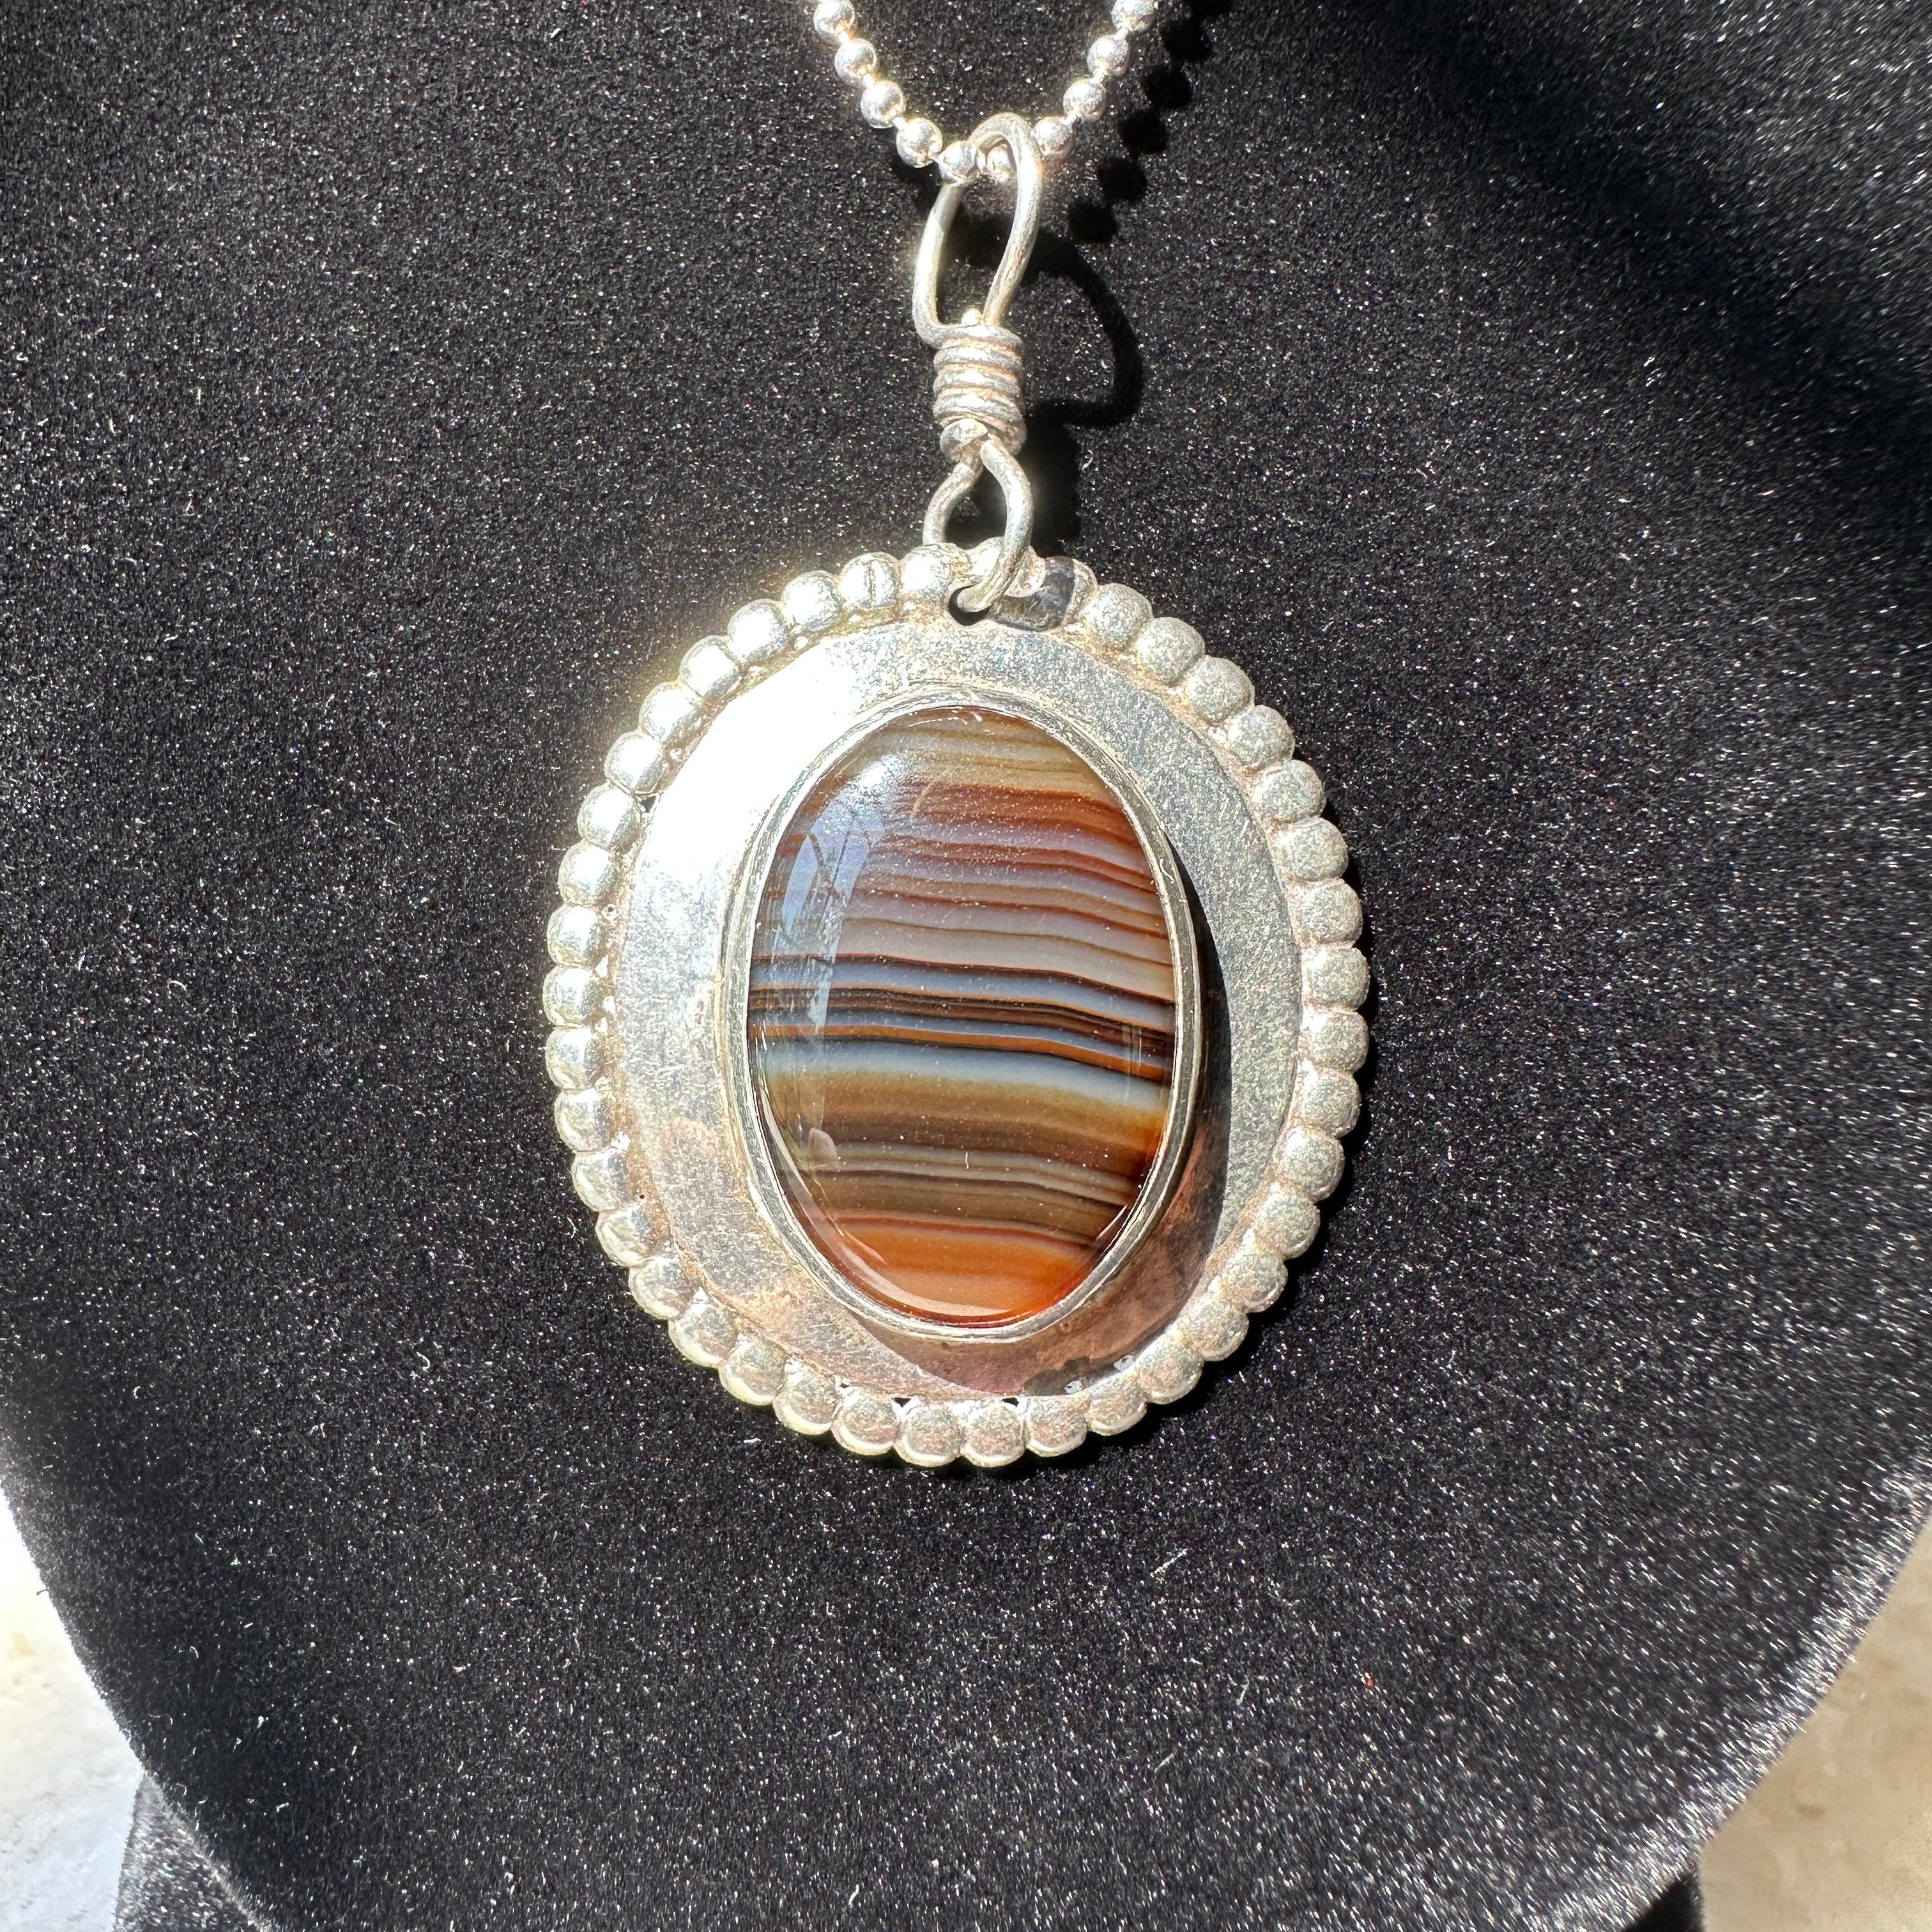 Handmade Sterling Silver and Banded Agate Pendant Necklace